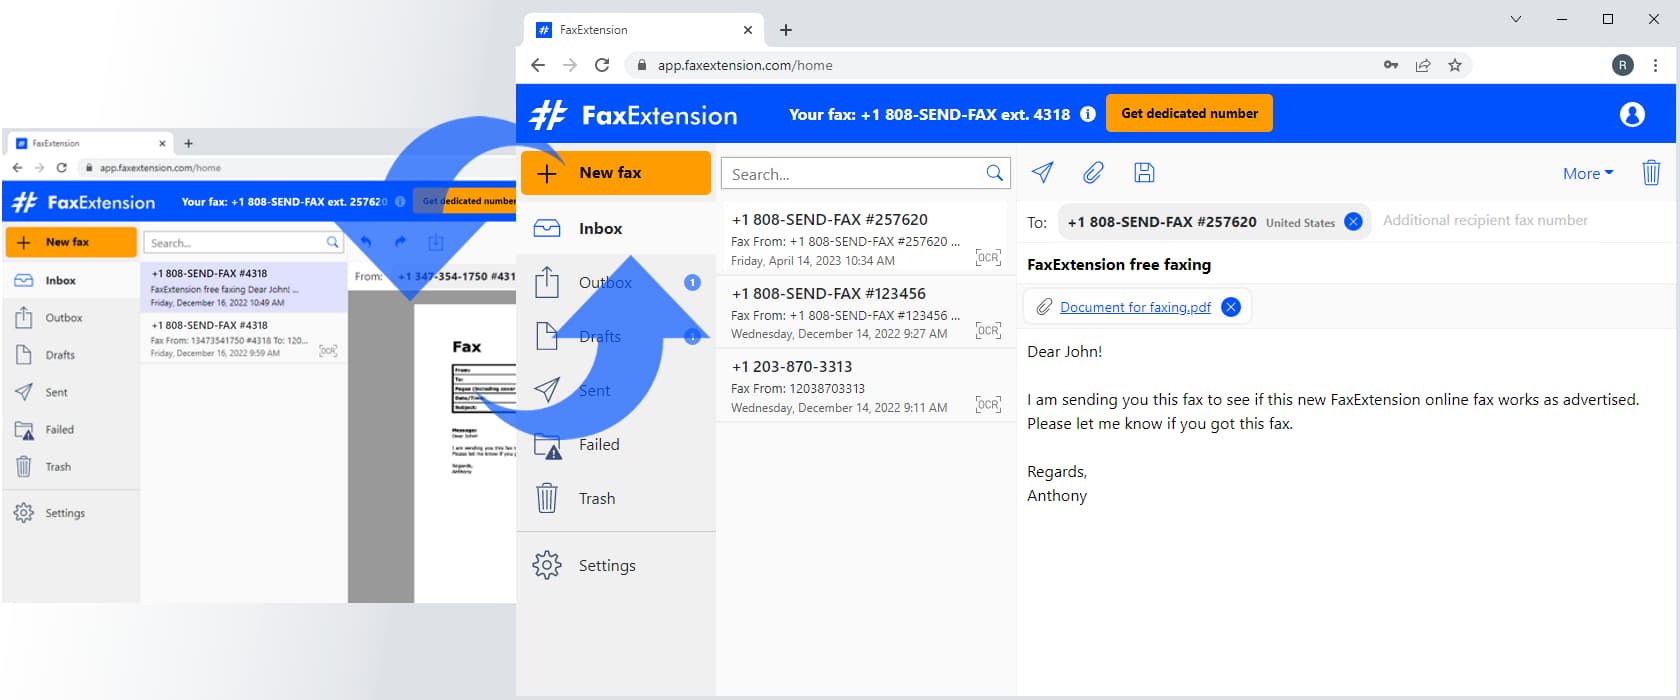 FaxExtension internet based fax